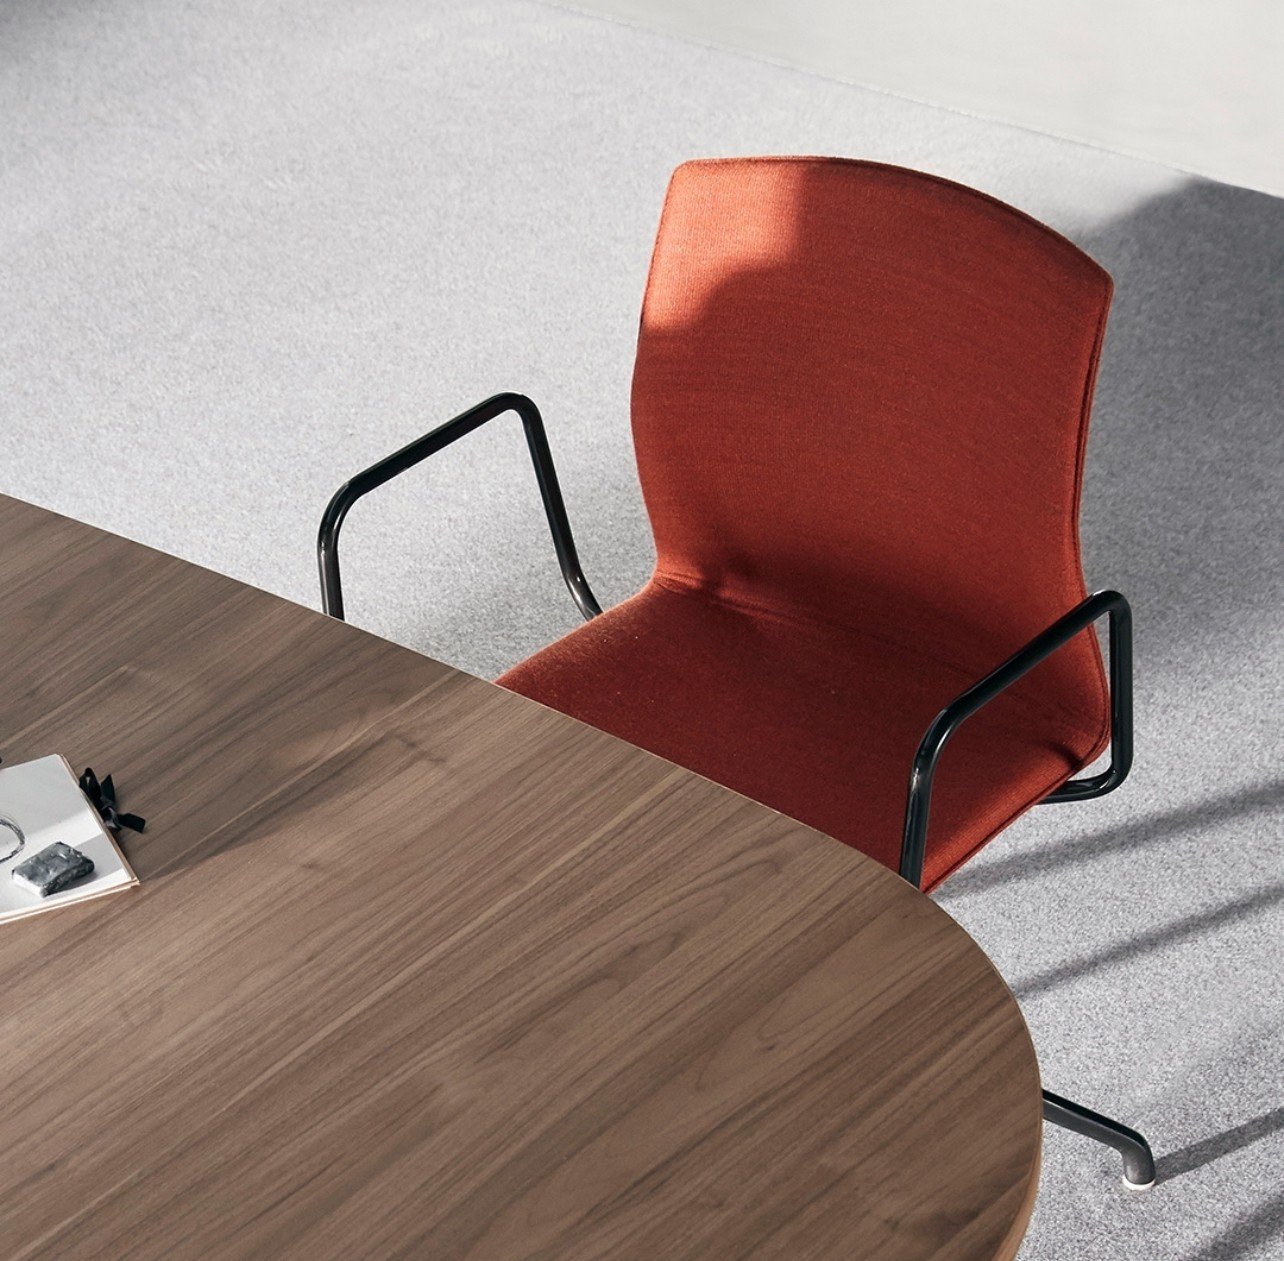 A timeless essential: Celebrate Upholstered ✨⁠
⁠
Whether you're looking to furnish a corporate, education, or hospitality setting, we've got you covered!⁠
⁠
#sourceinternational #ametro #upholsteredchair #officeseating #officefurniture #modernseating